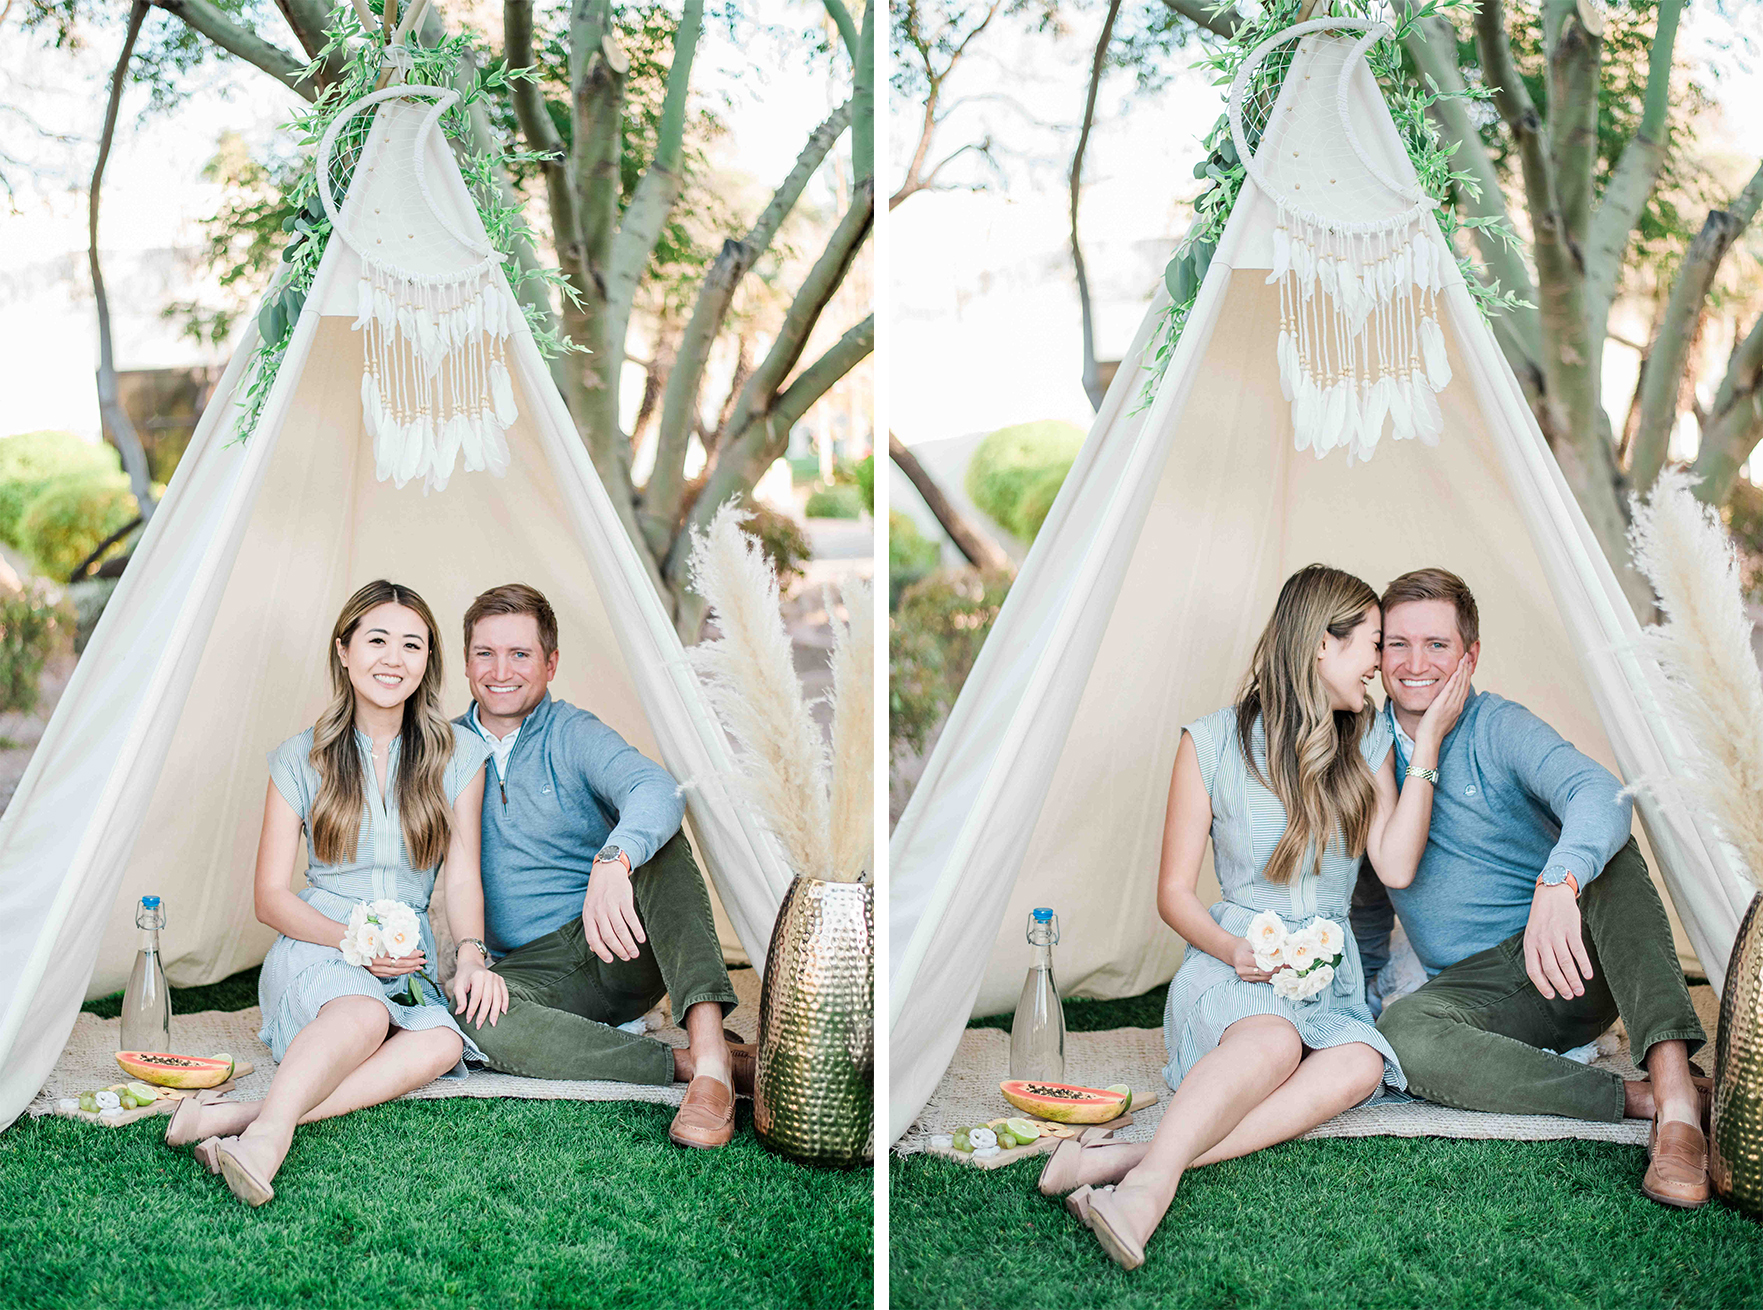 Demi Bang and Tyler inside a teepee with Desert Bloom Picnics, an outdoor picnic company in Scottsdale, Arizona.